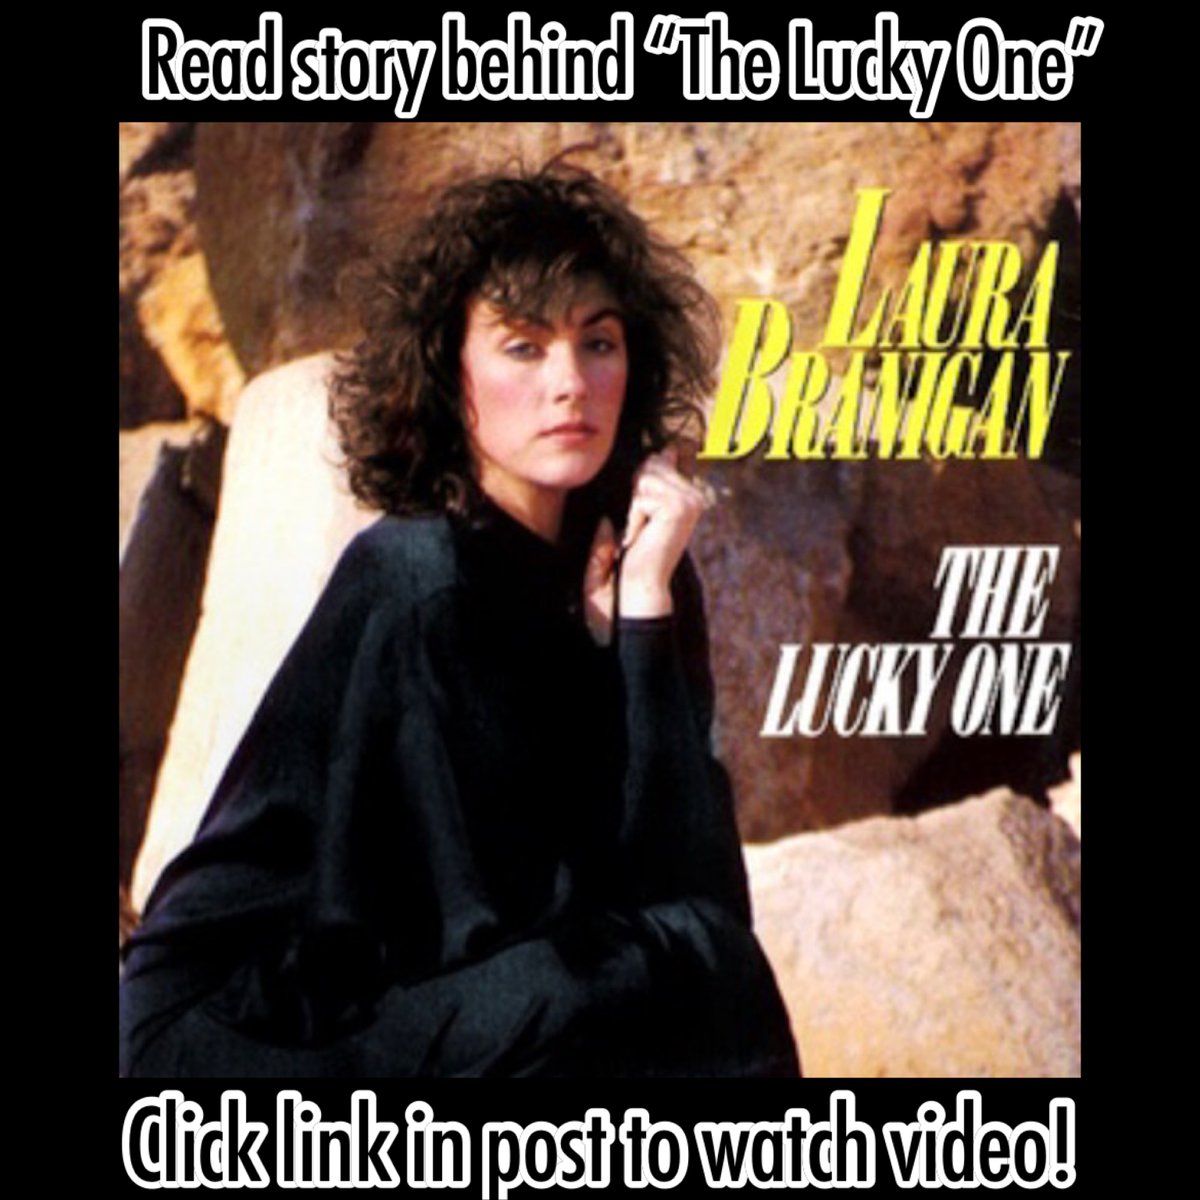 #BehindTheMusic Here's the story behind the writing of #TheLuckyOne, 2nd #single from #LauraBranigan's biggest-selling #SelfControl album. Broadcast in Nov. 1983, #TVfilm #AnUncommonLove featured a #HaroldFaltermeyer arrangement of 'The Lucky One,' a #song that #BruceRoberts